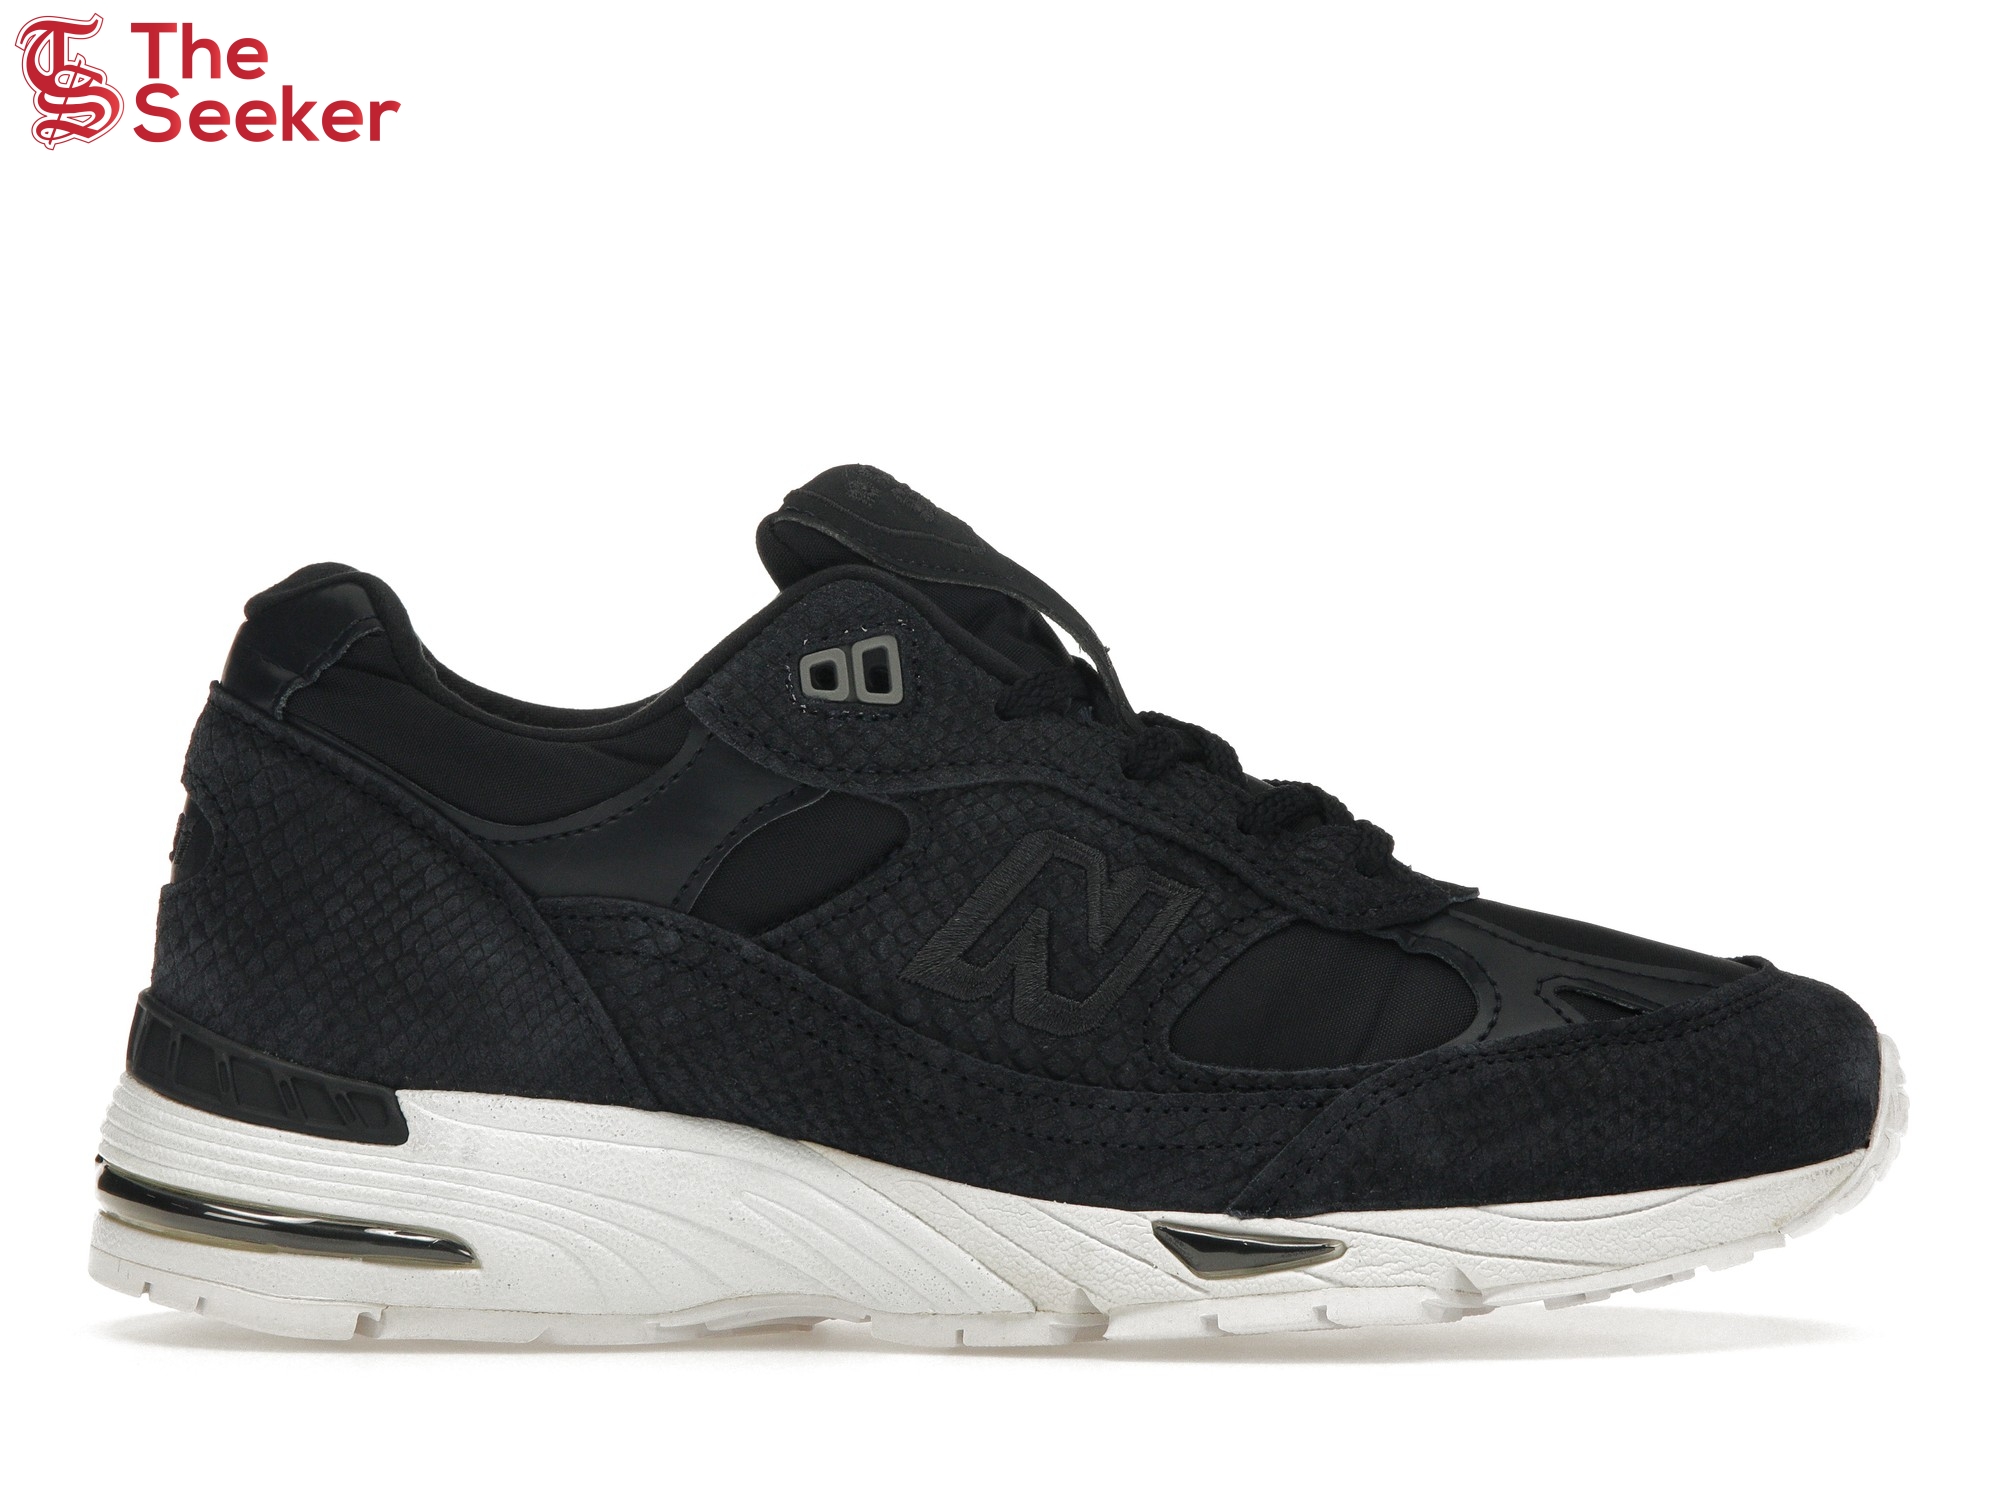 New Balance 991 Made in England Black Reptile (Women's)